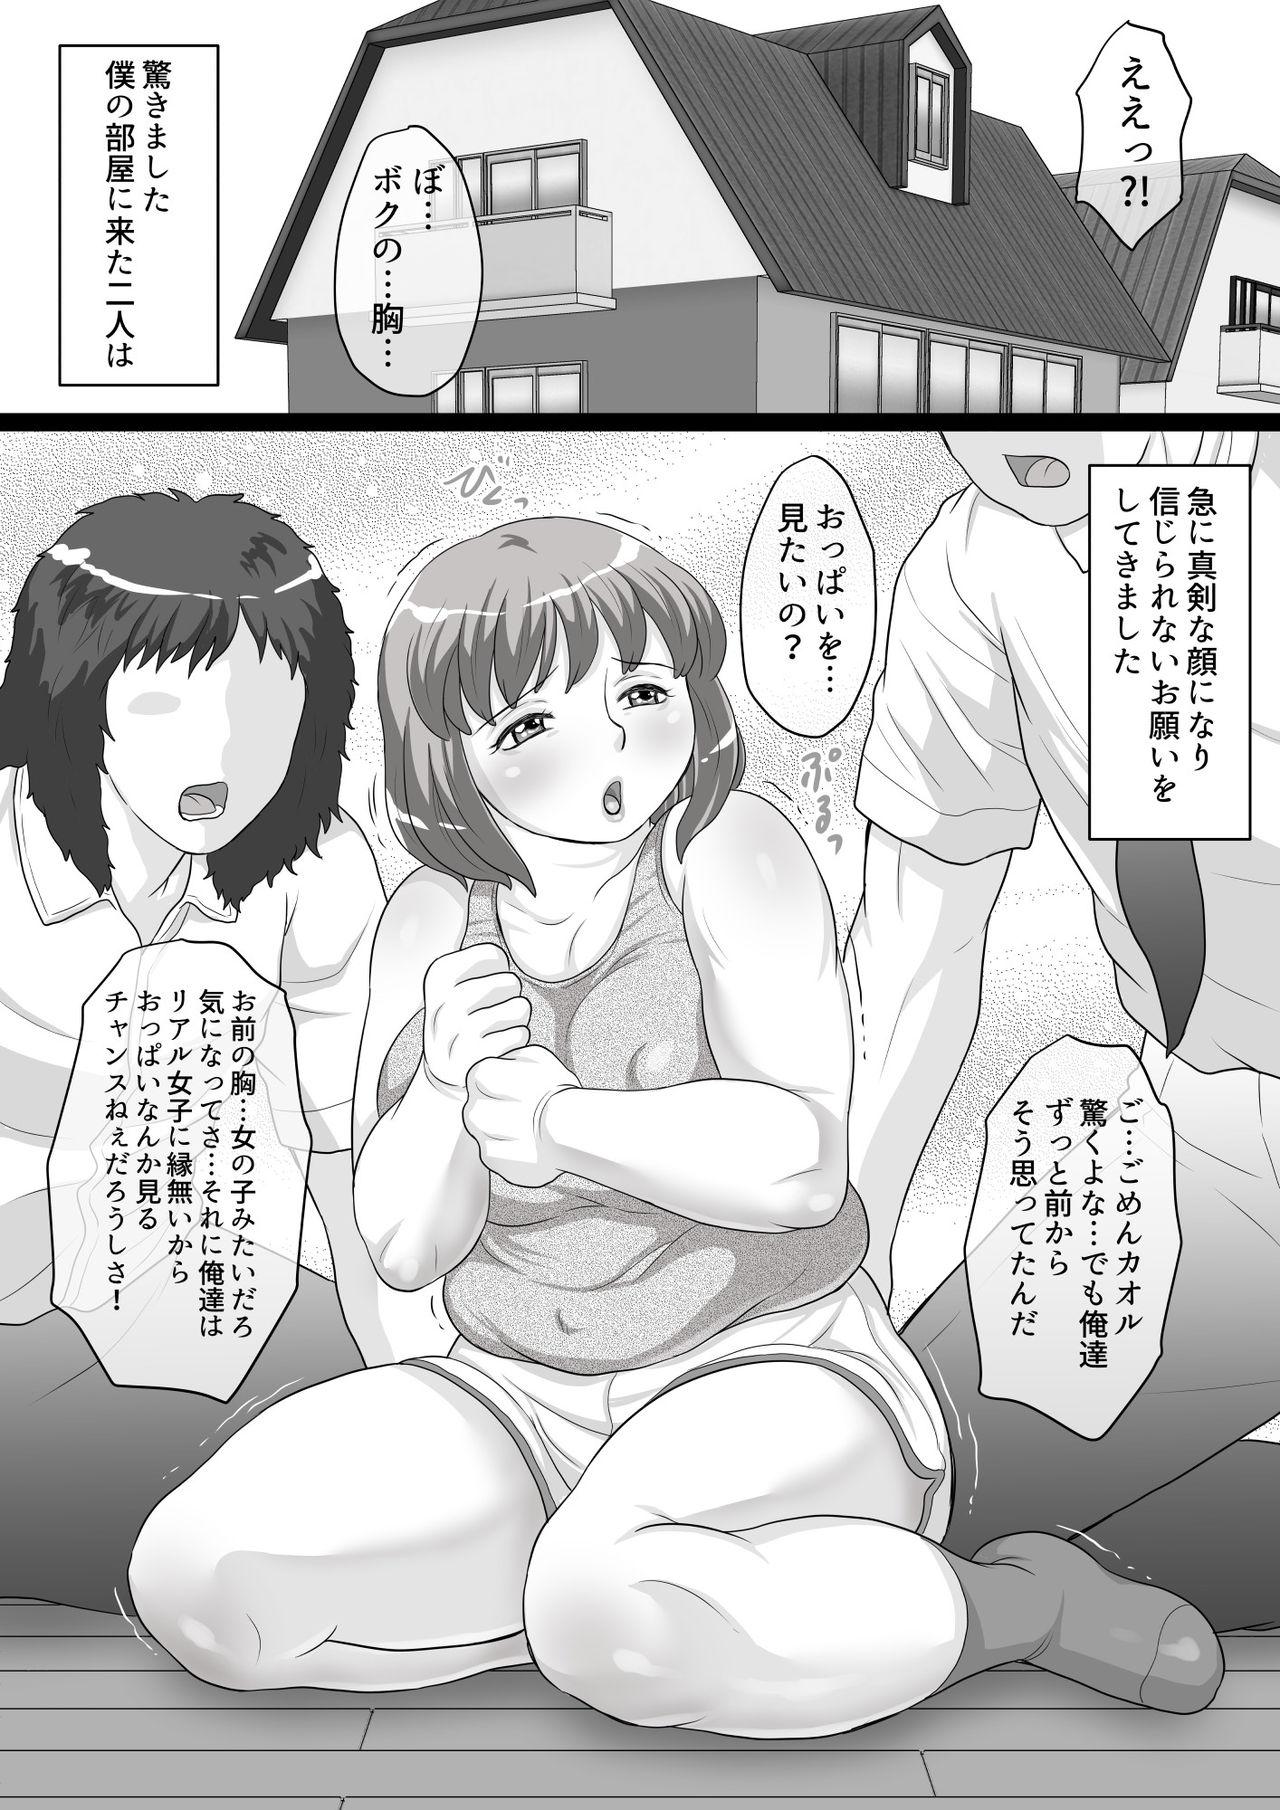 Fat shota's boobs are for being rubbed! 4